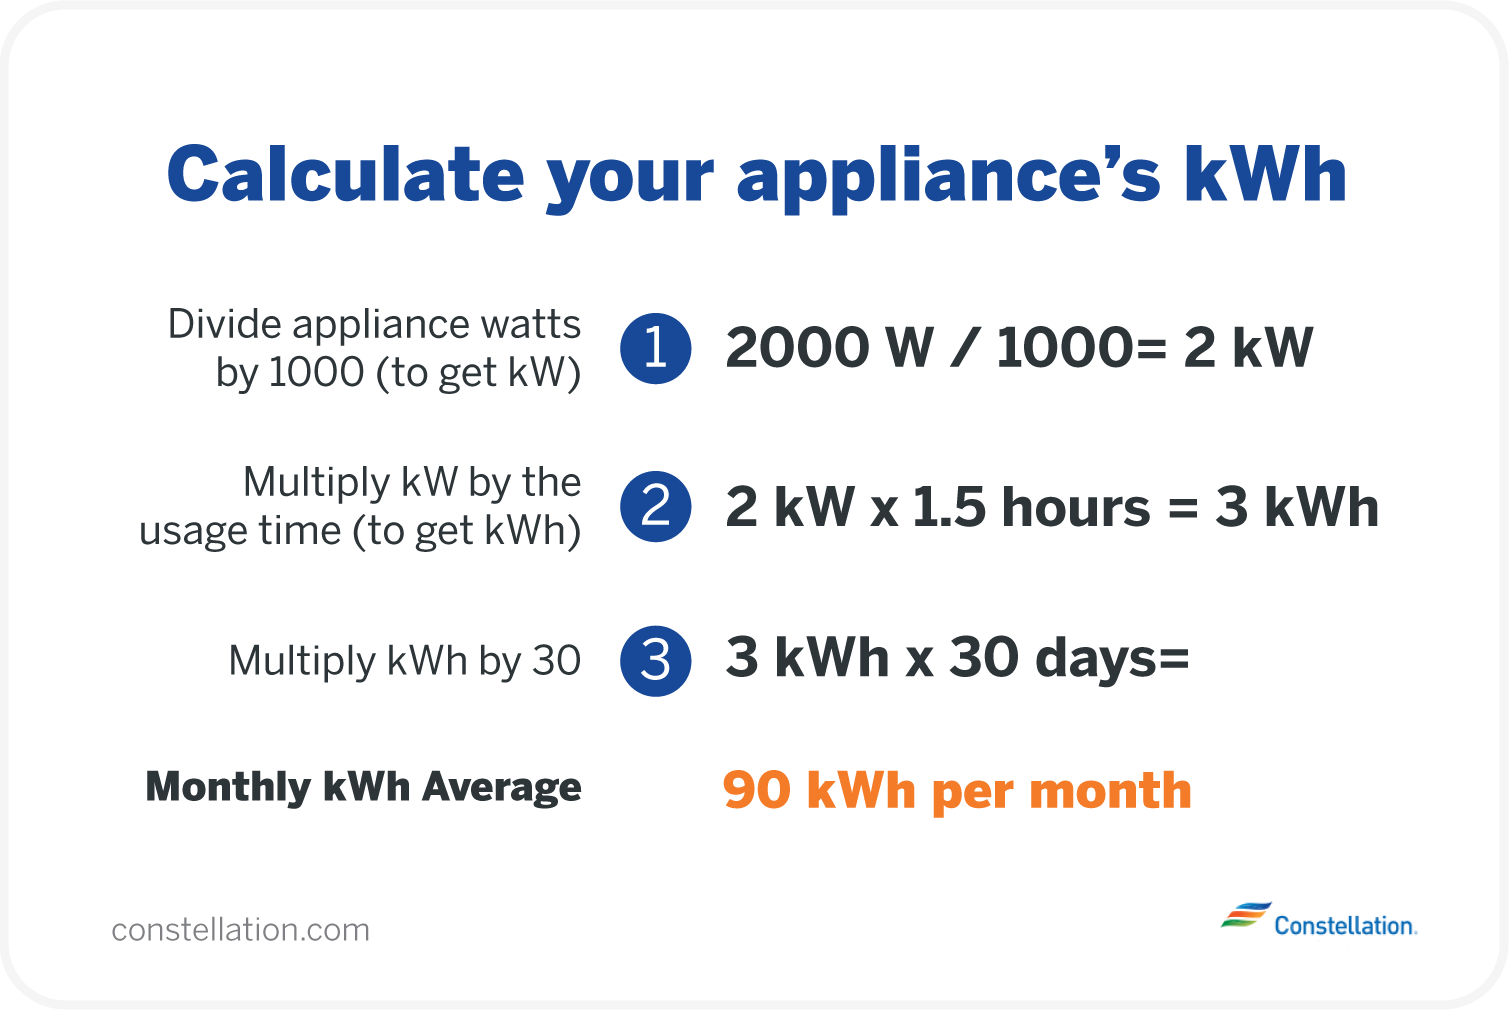 Calculate your appliance's kWh